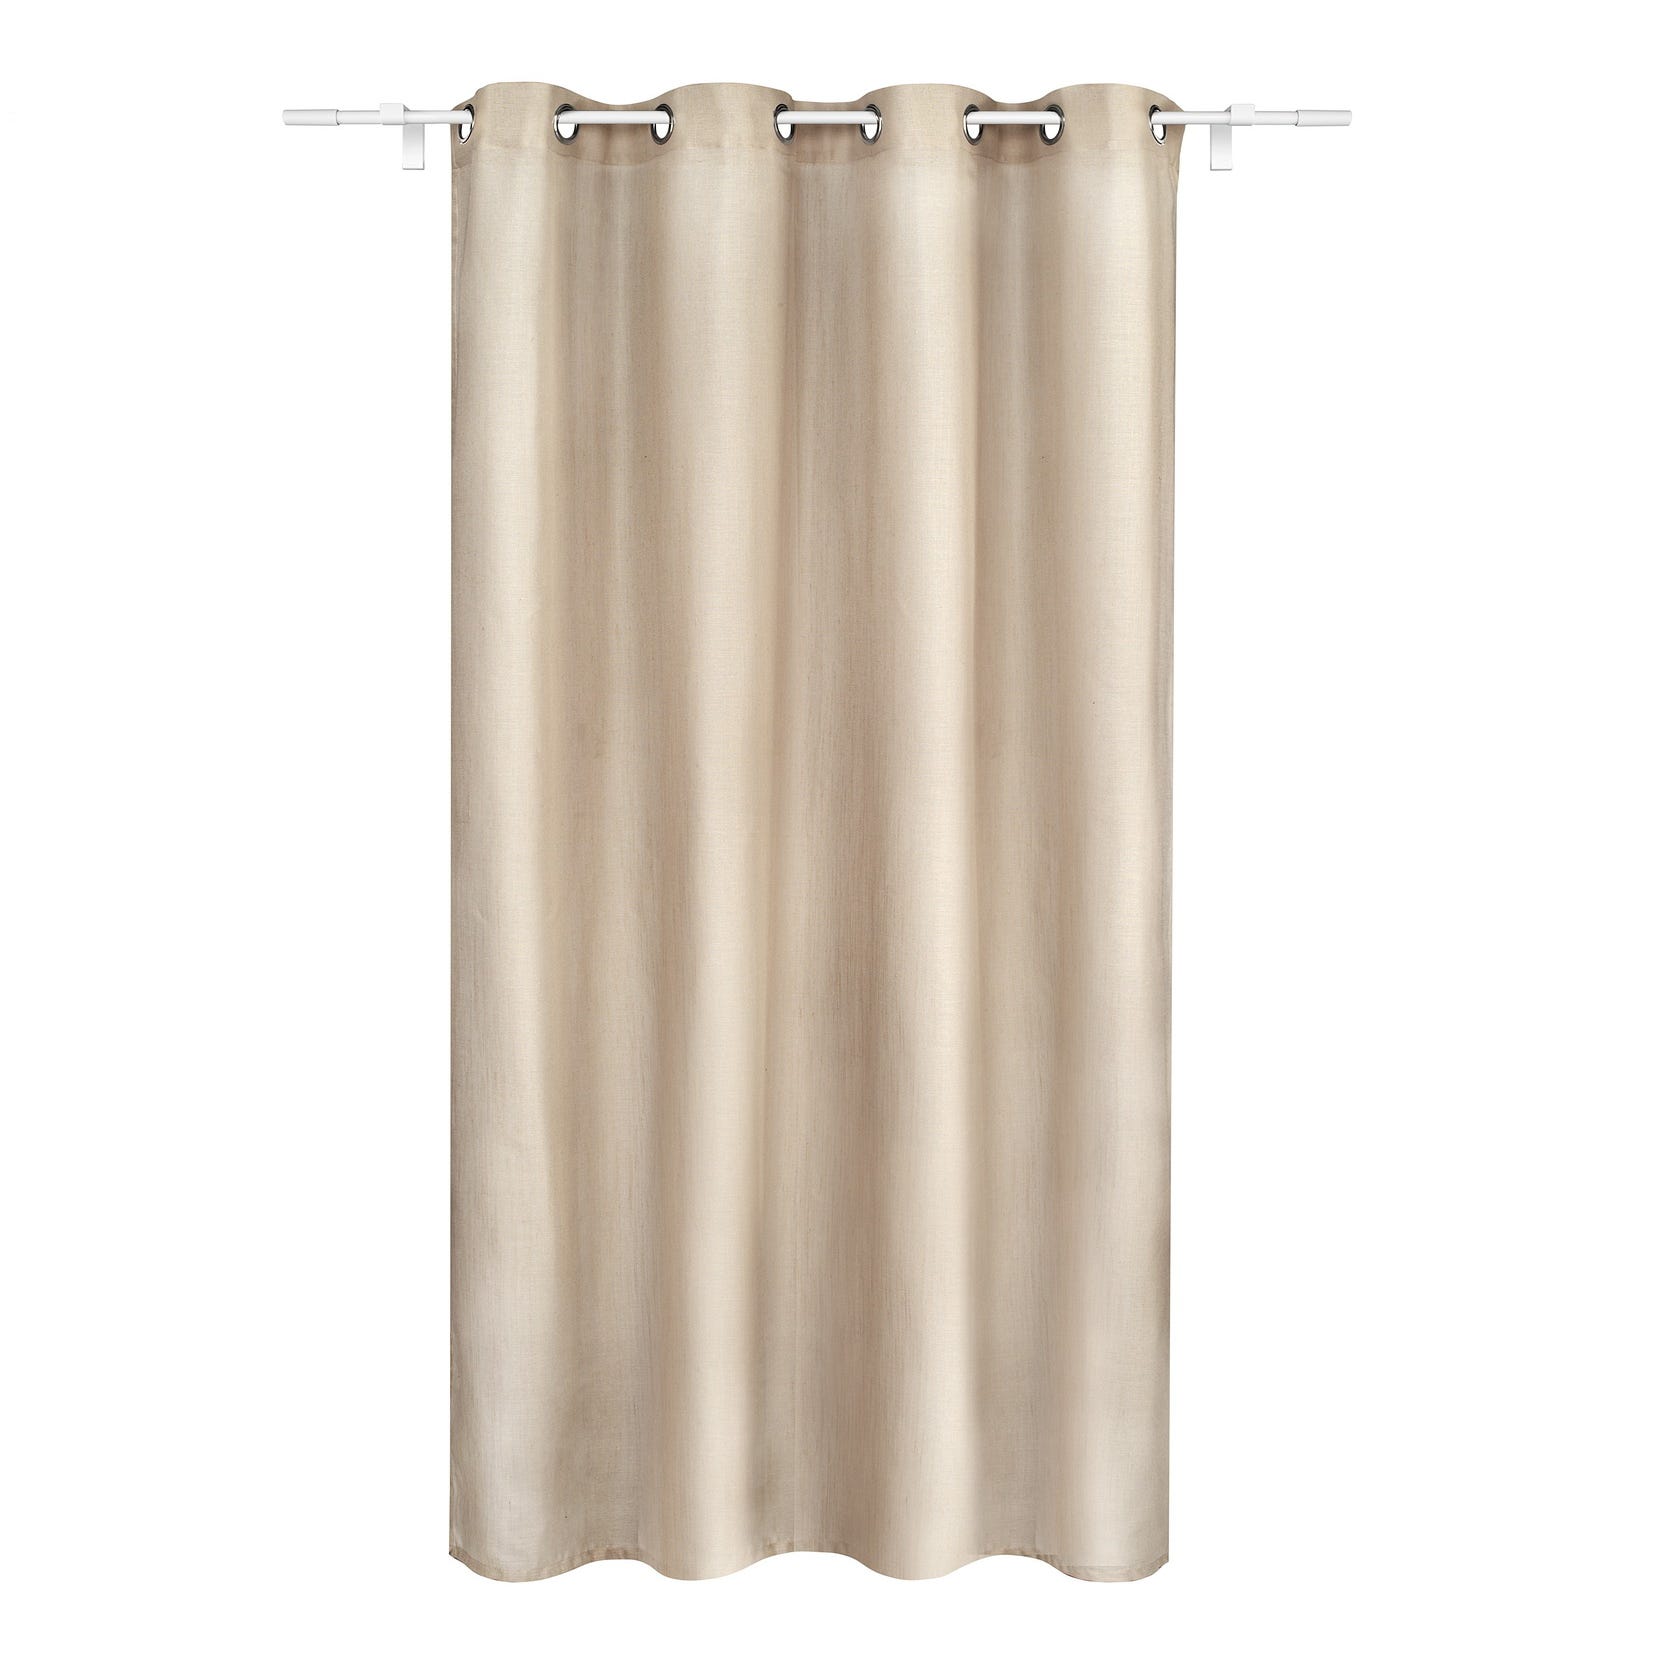 Easydeco for the planet - Tenda in lino naturale 140 x 270 cm - 140 x 270  cm - Beige